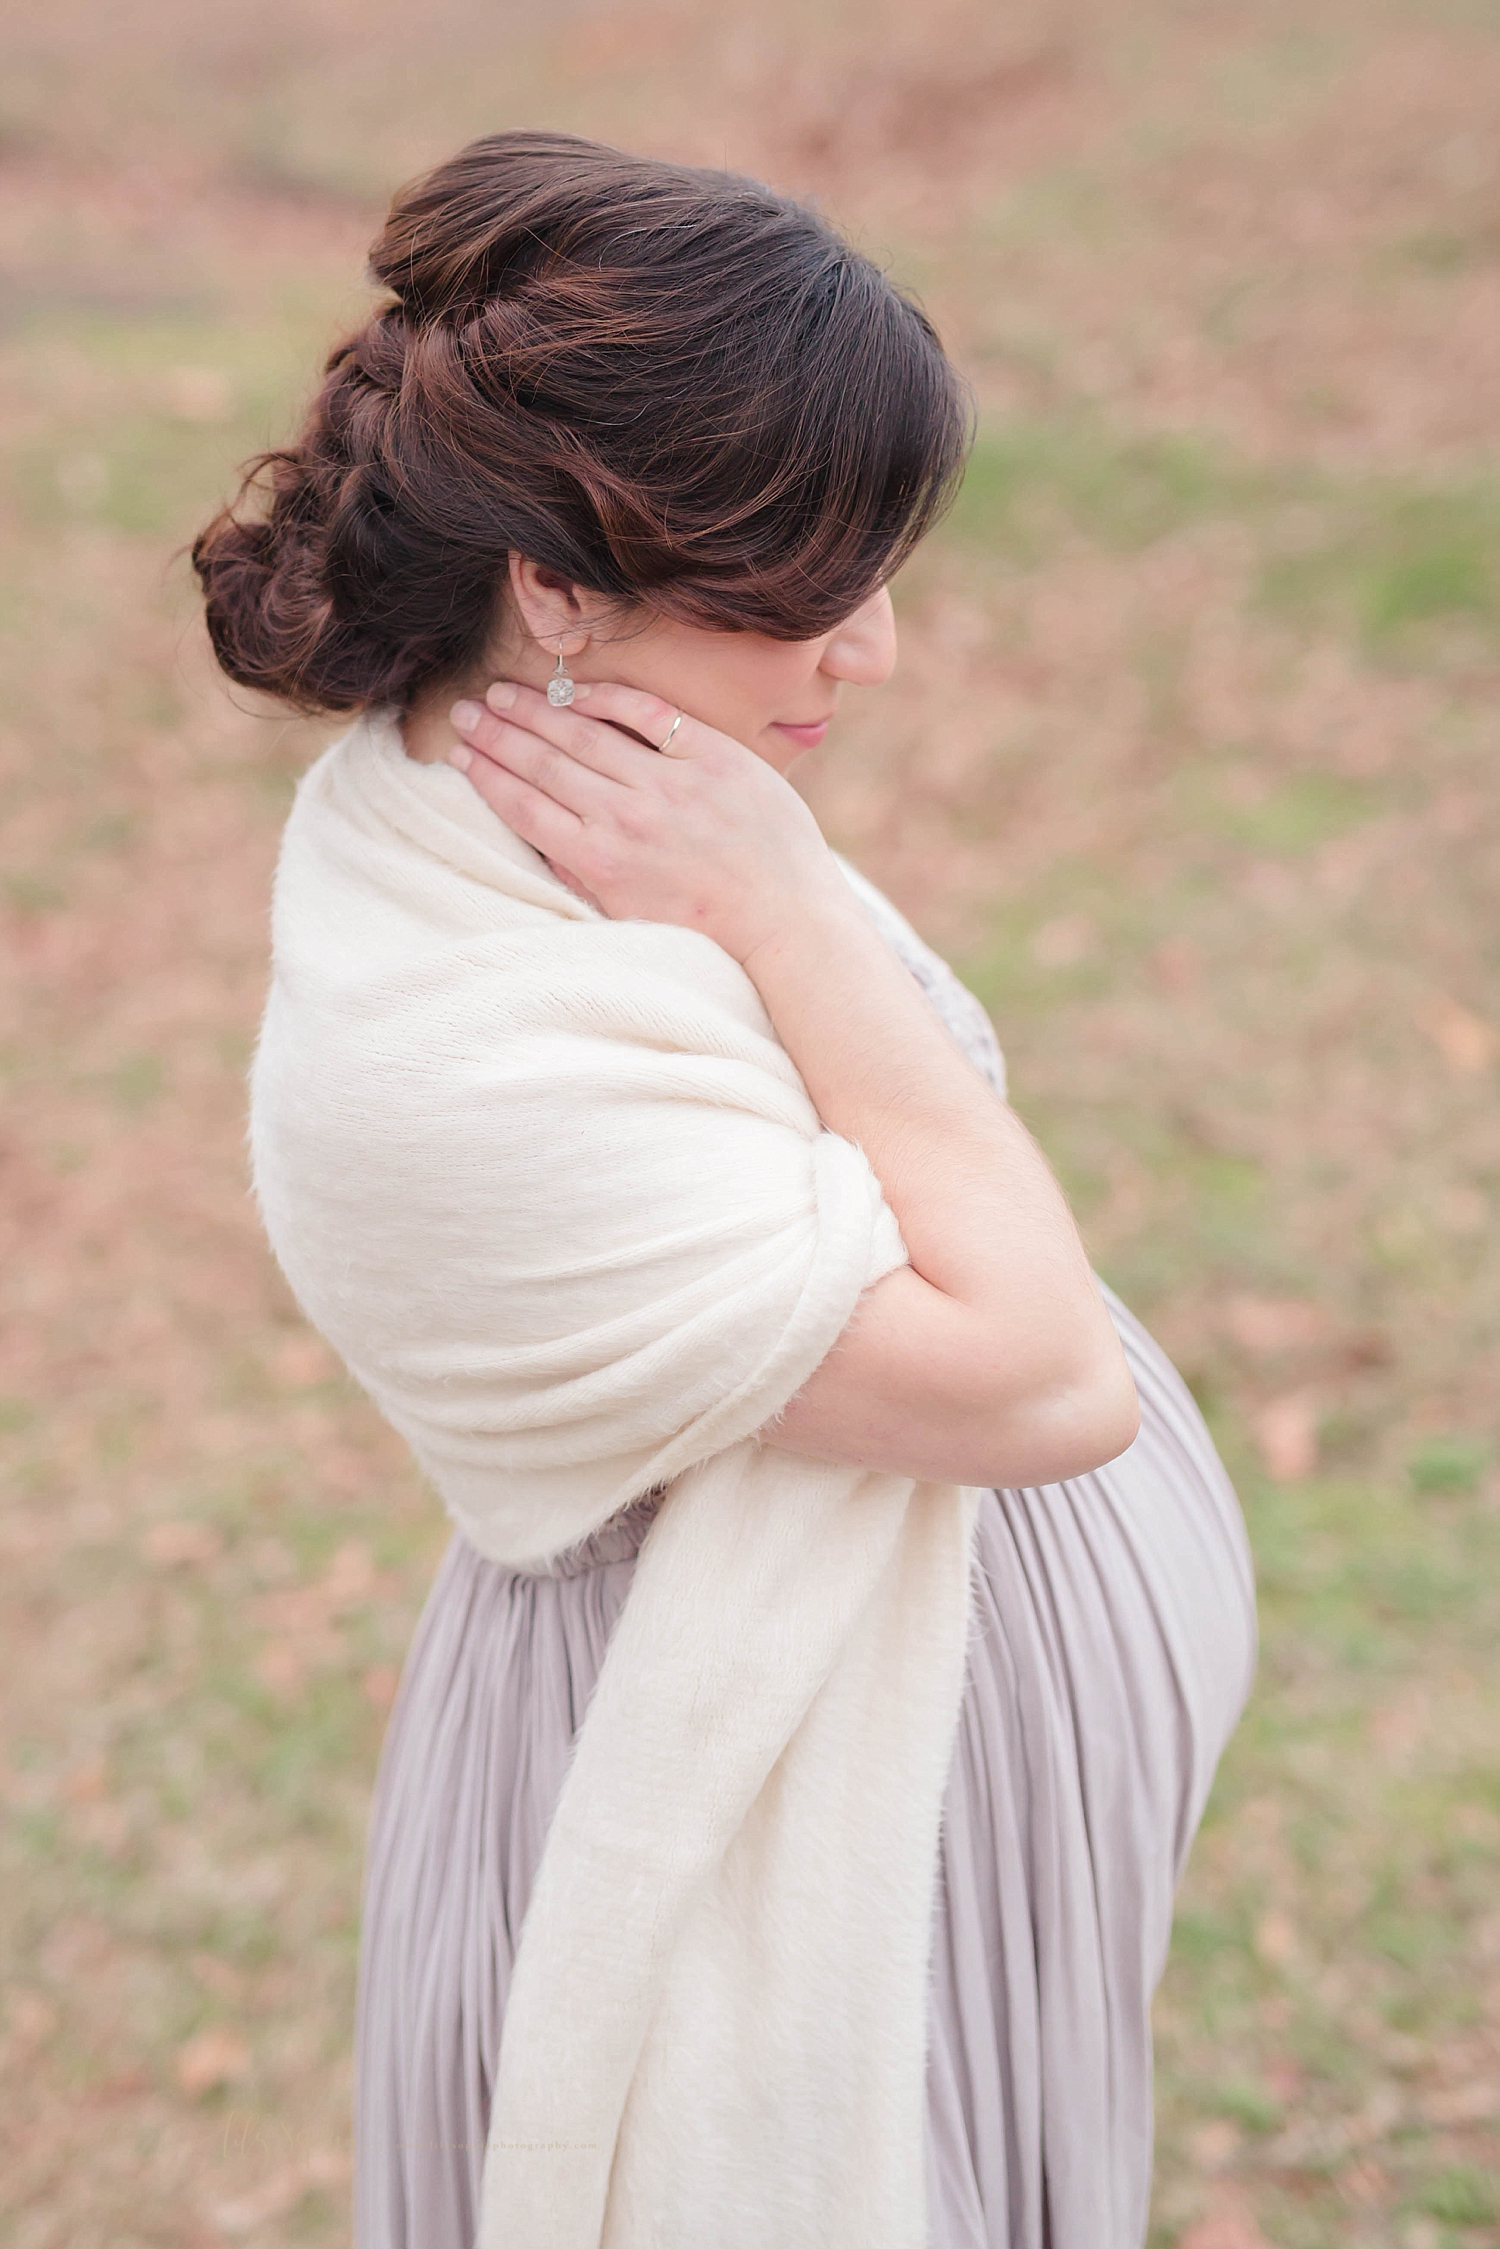  Atlanta mother-to-be with braided auburn hair wears a taupe dress.  She has an off-white shawl draped over her shoulders. with her right arm bent and her right hand resting on her neck.   